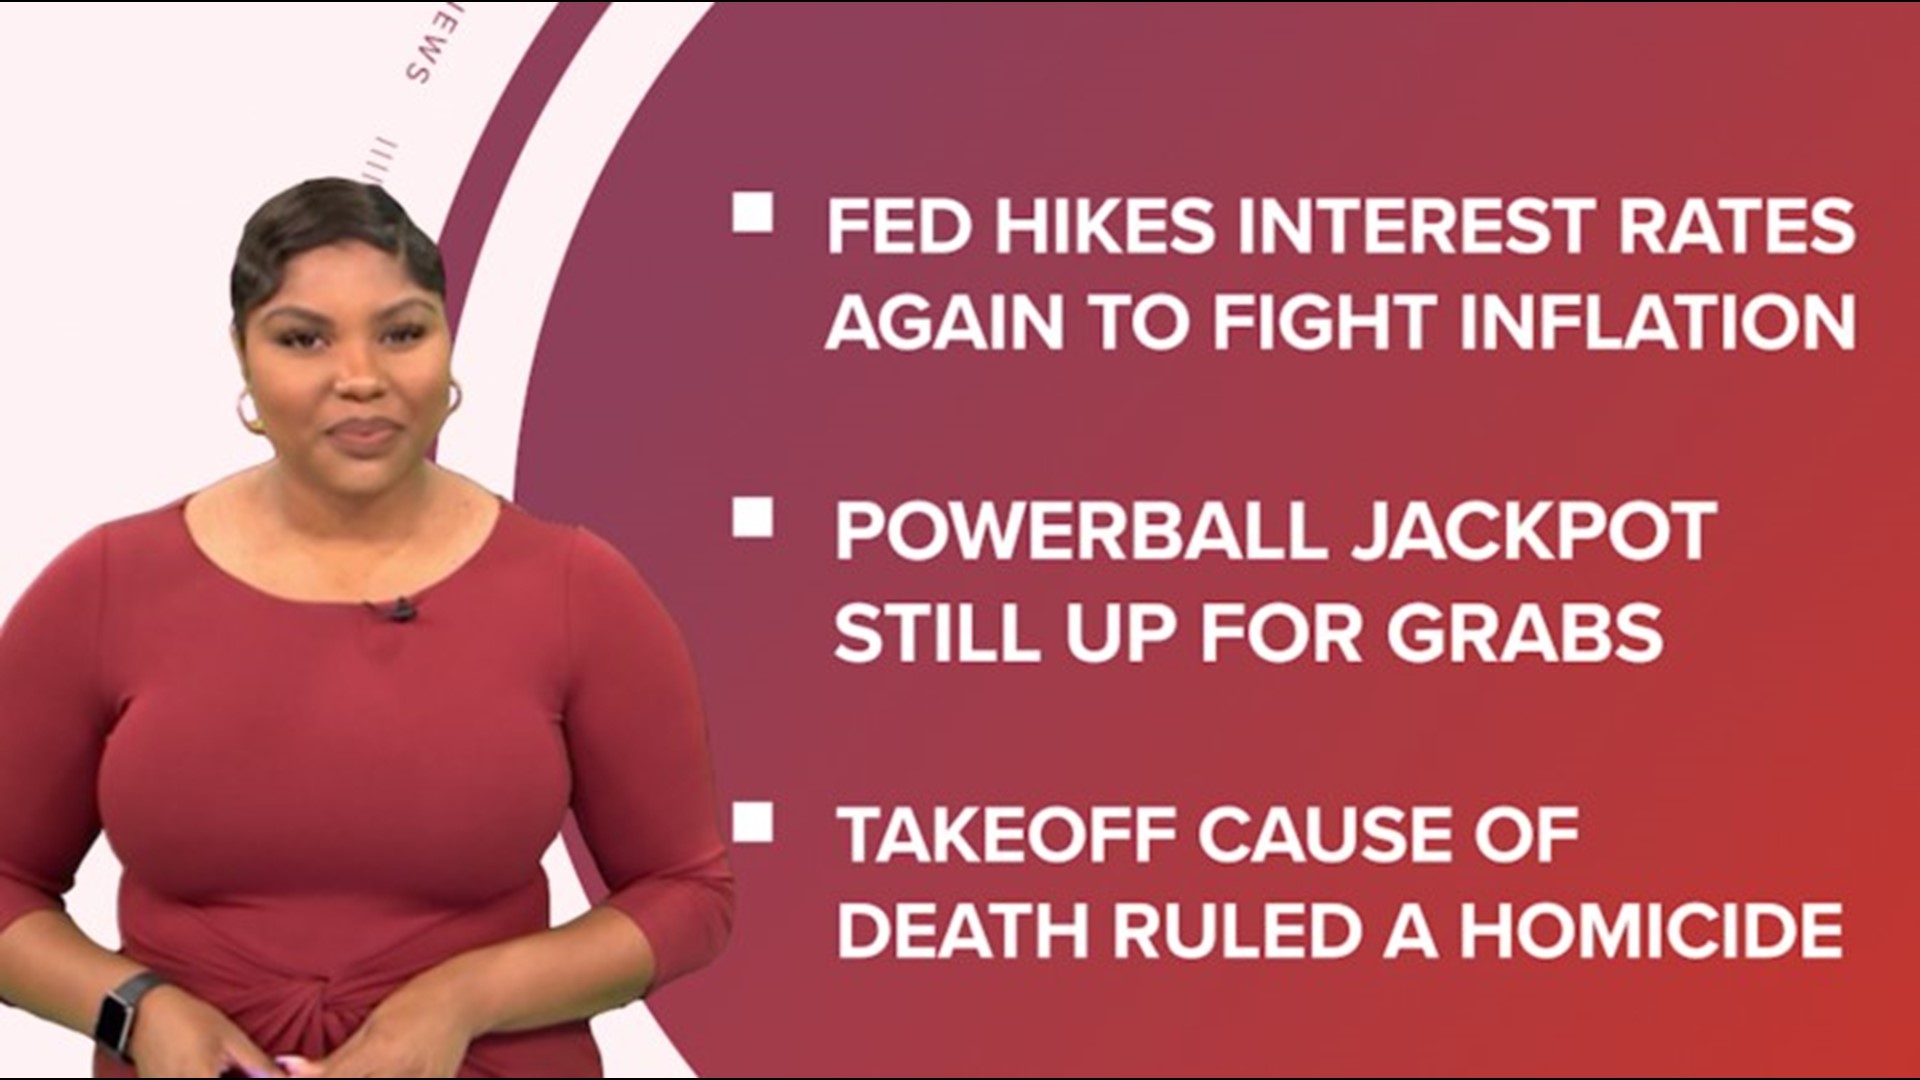 A look at what is happening in the news from the latest interest rate hike and its impacts to the odds of winning Saturdays $1.5B Powerball jackpot.